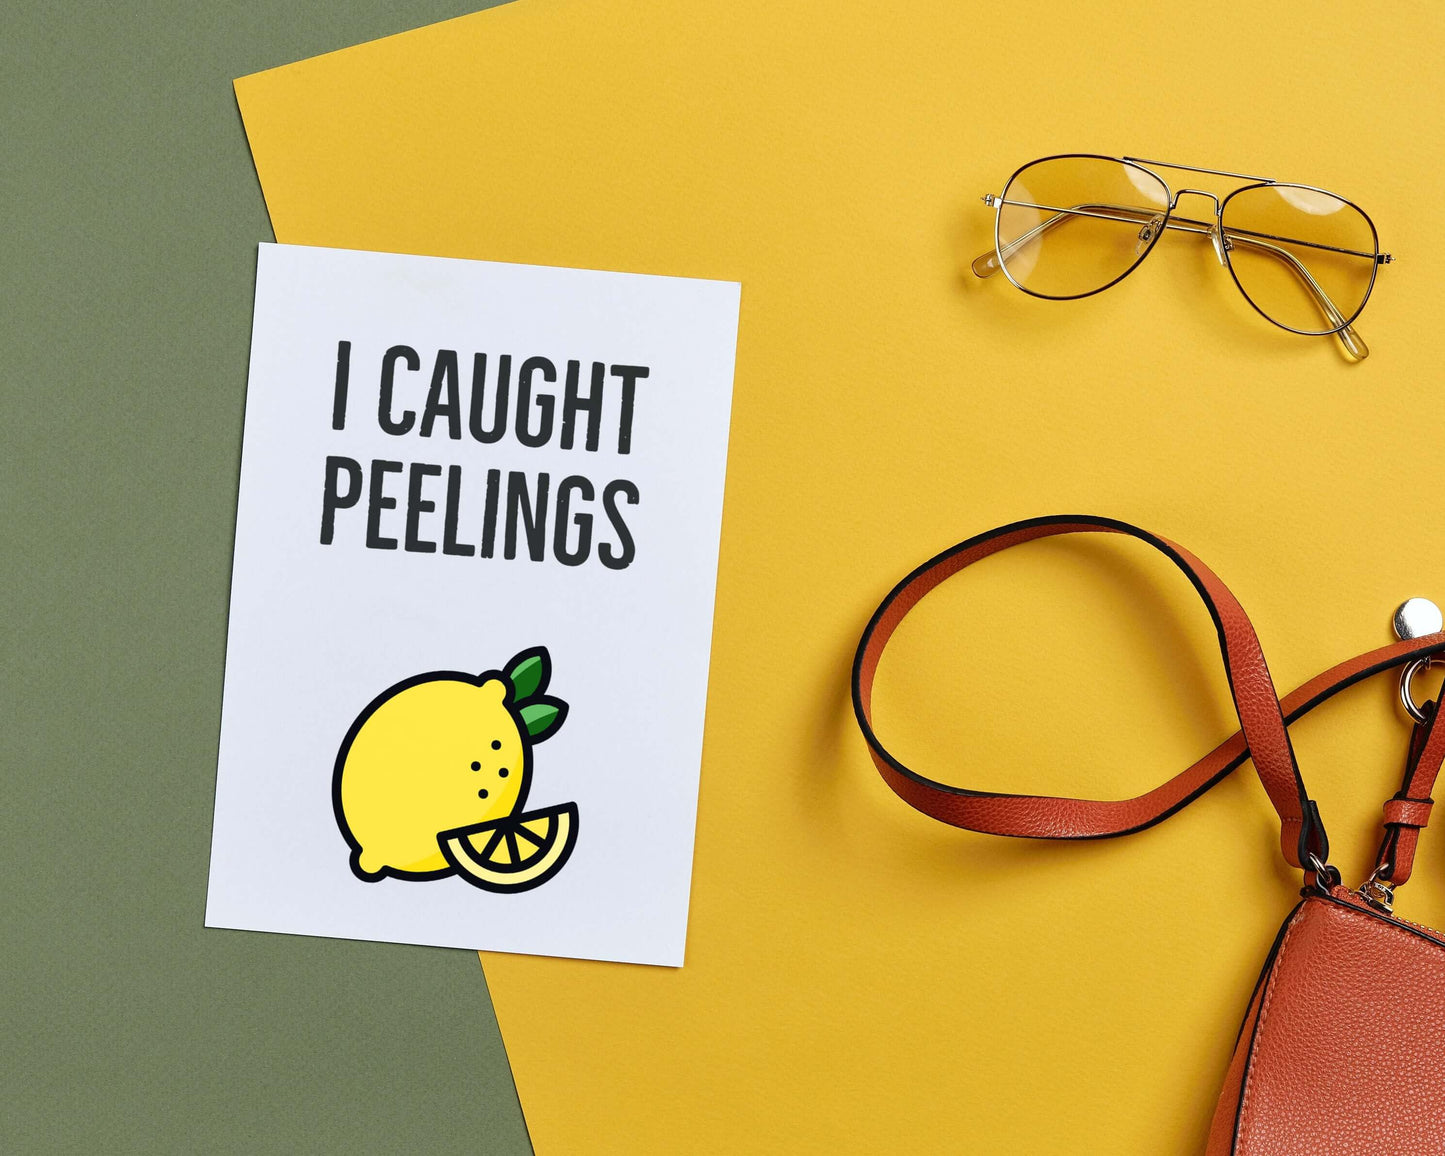 The Card Store UK's I Caught Peelings | Funny Lemon Love Pun Greeting Card | Everyday Blank Pun Card, General Cards for £3.50 each